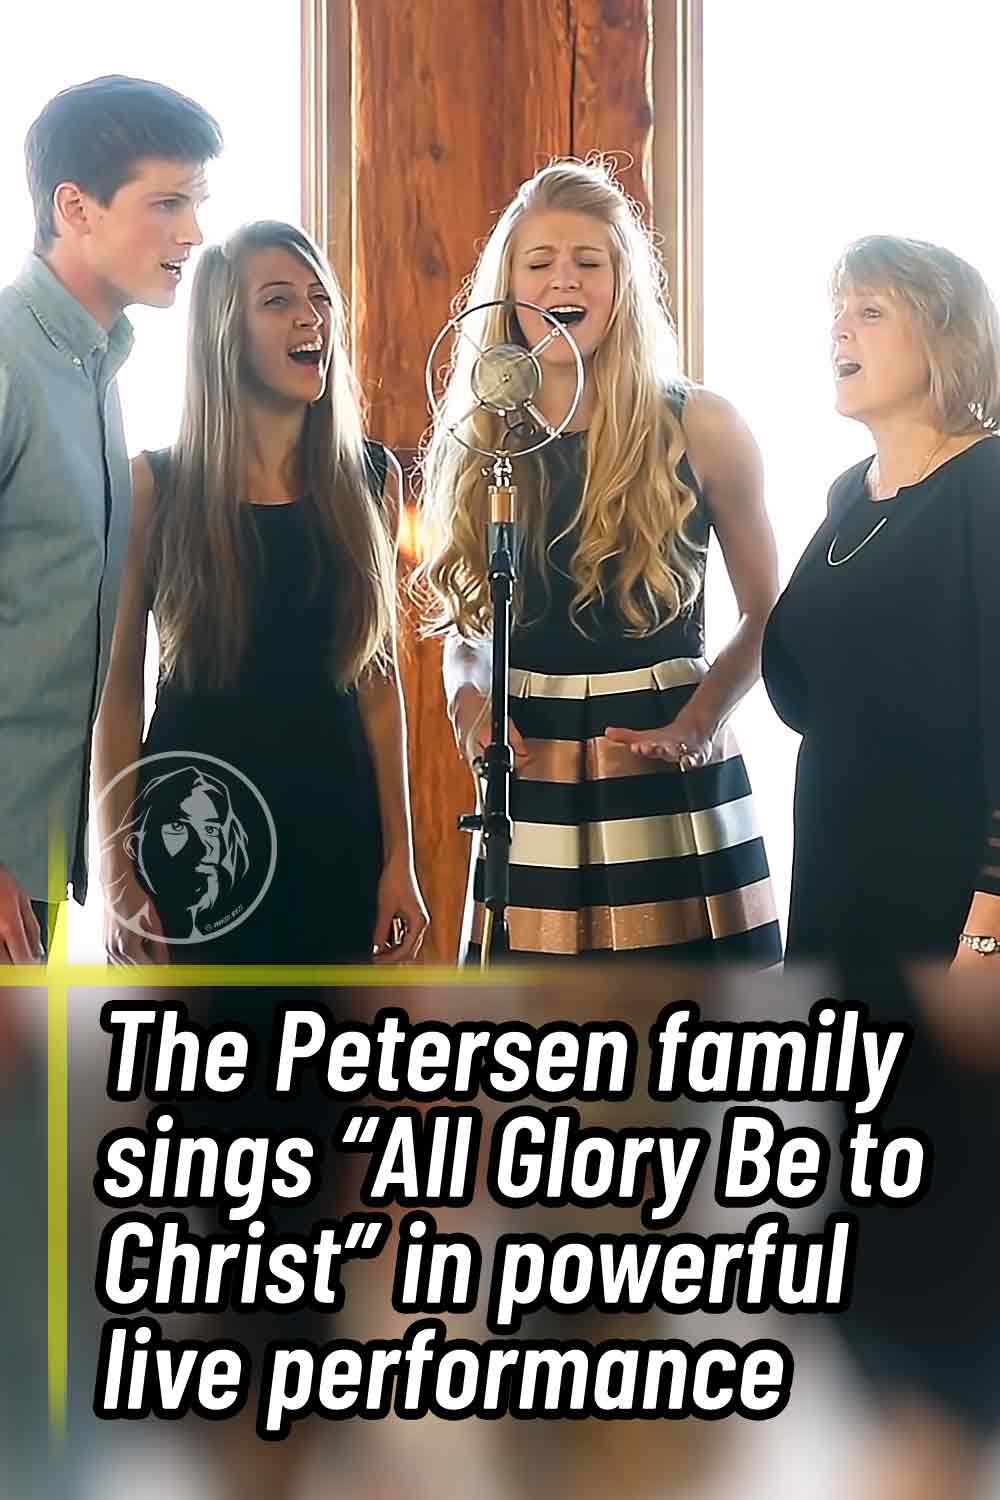 The Petersen family sings “All Glory Be to Christ” in powerful live performance